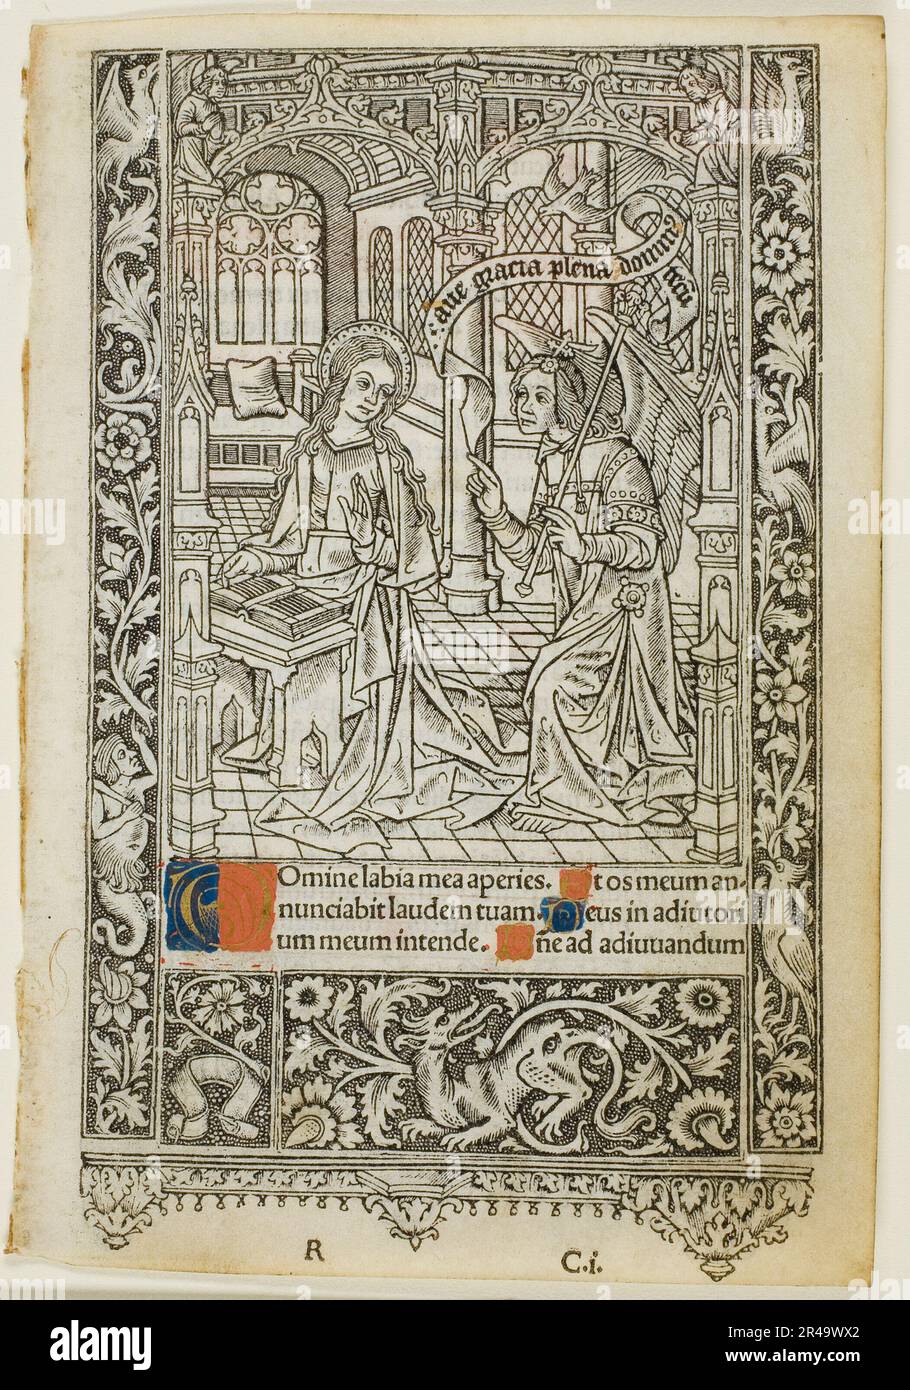 Annunciation, from a book of hours, 1505/10. Stock Photo